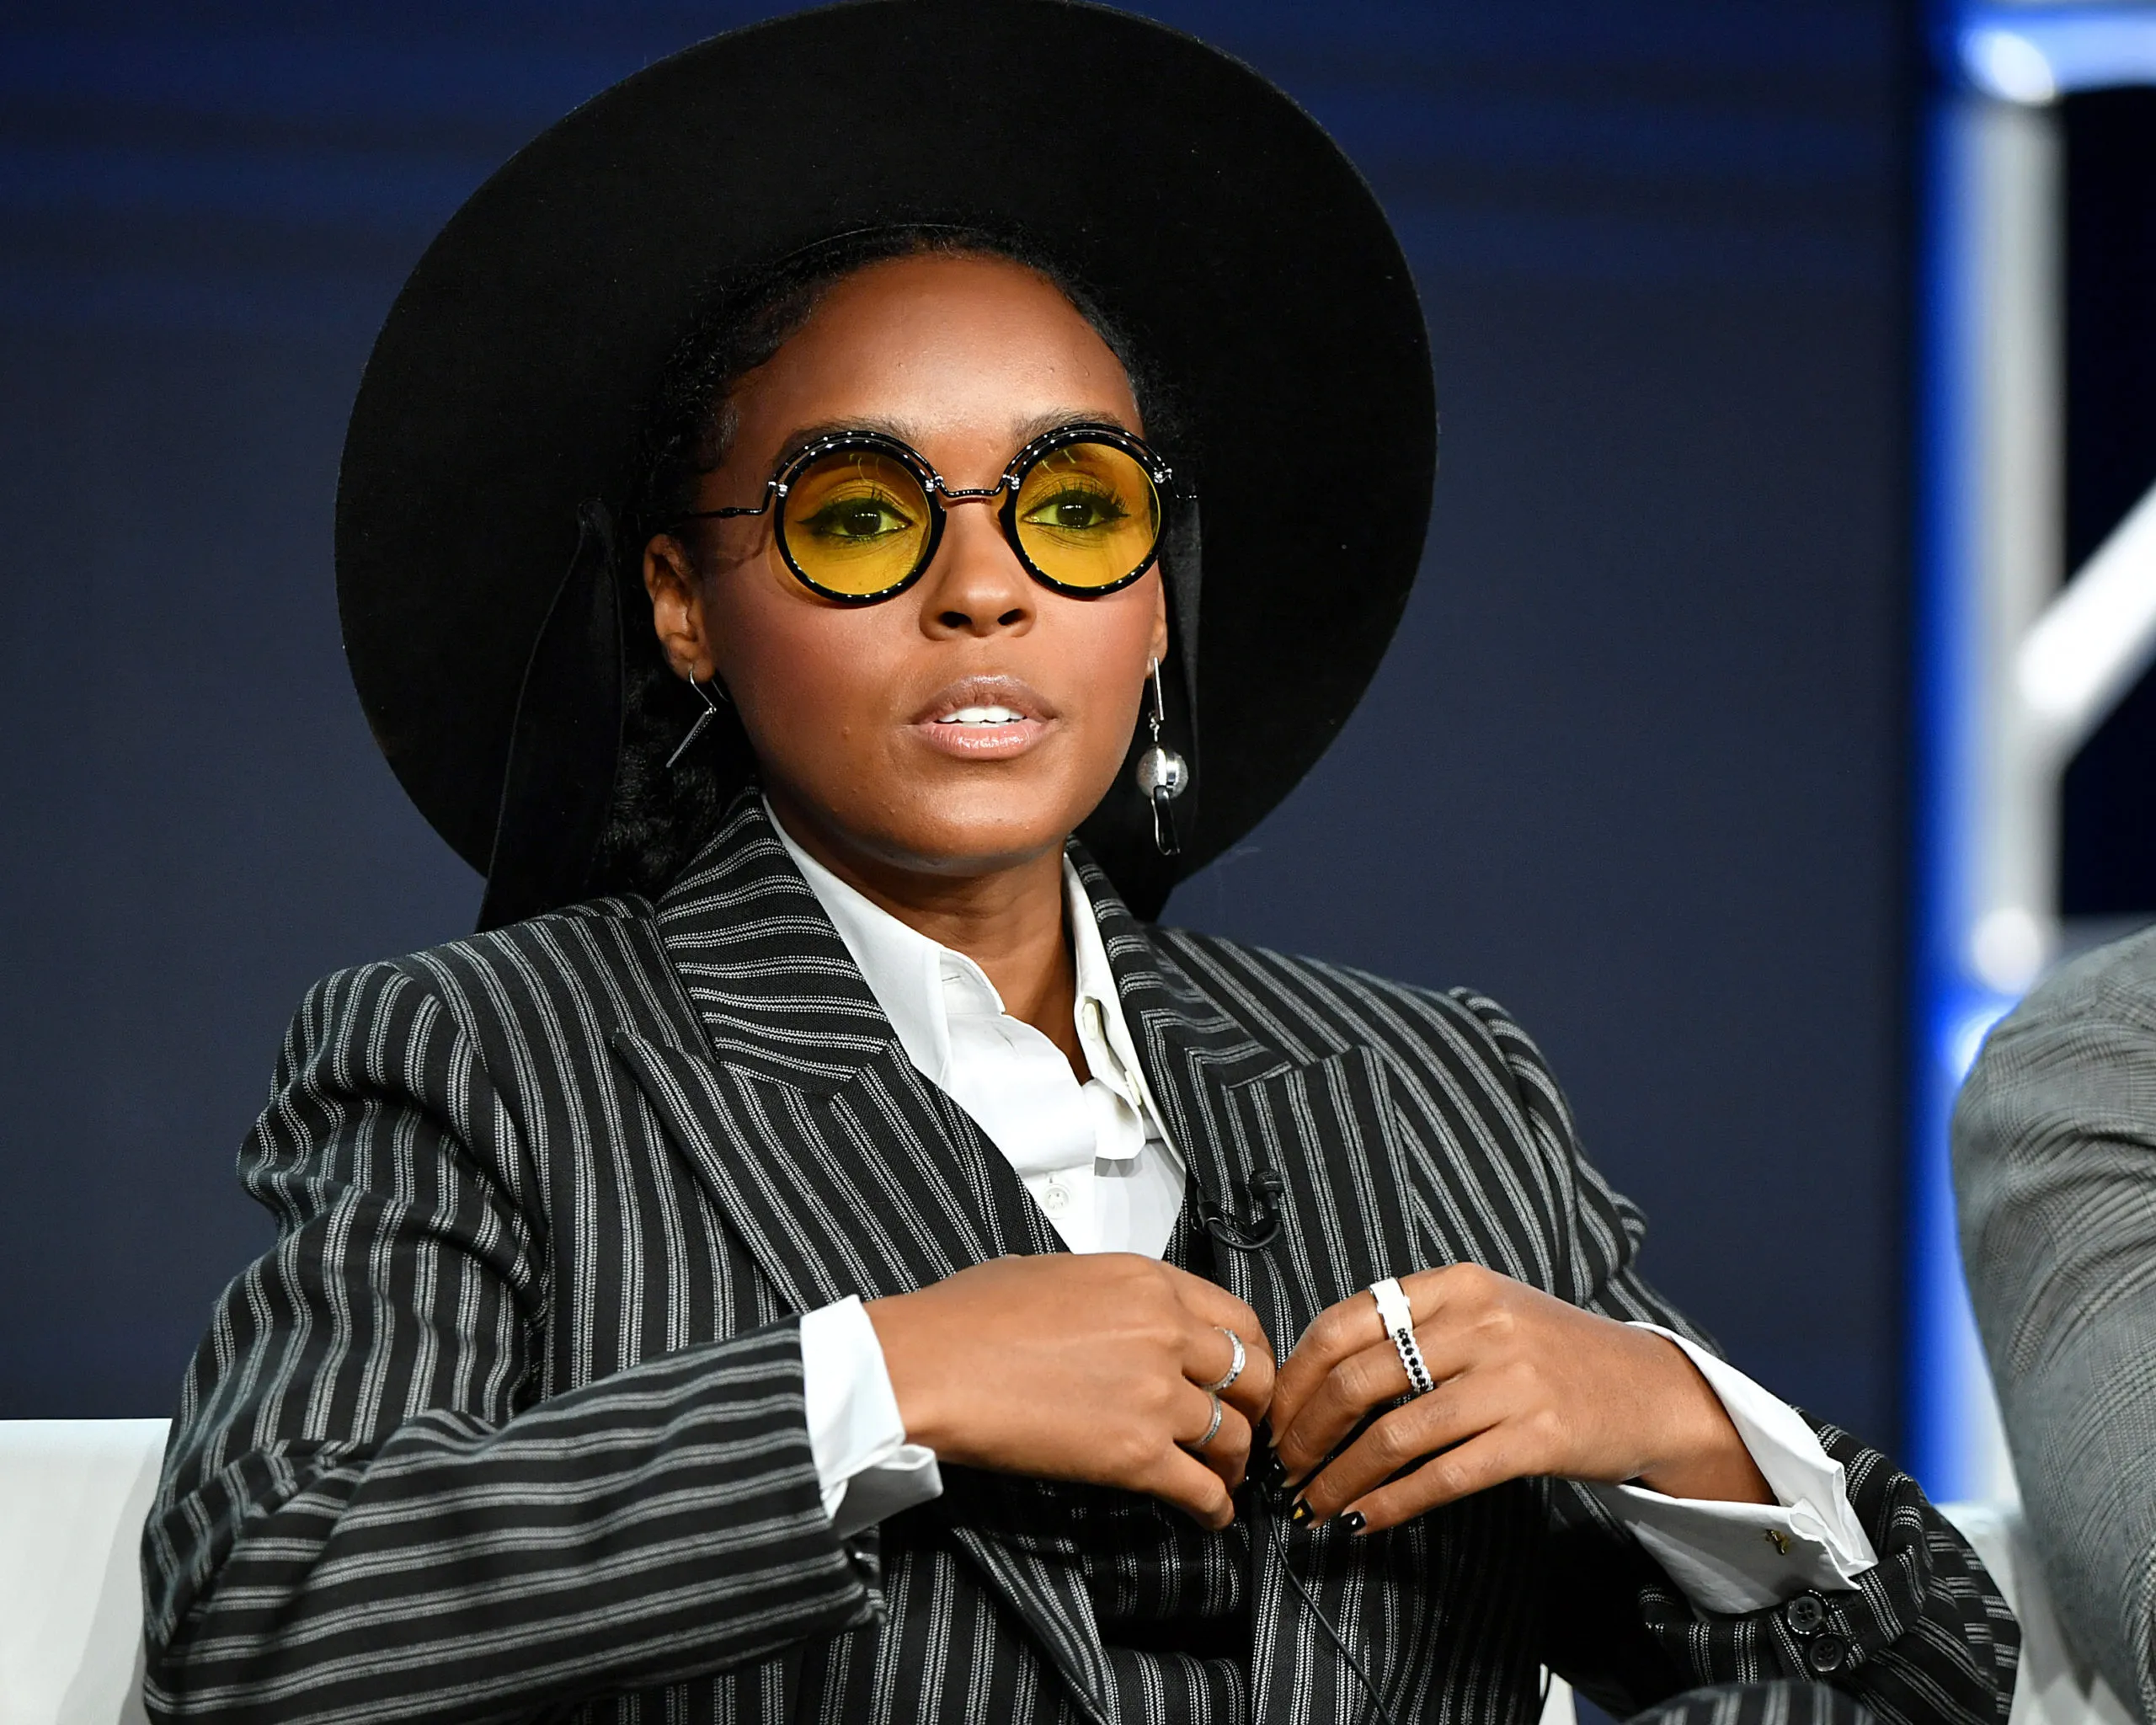 Janelle Monáe has opened up about her gender identity